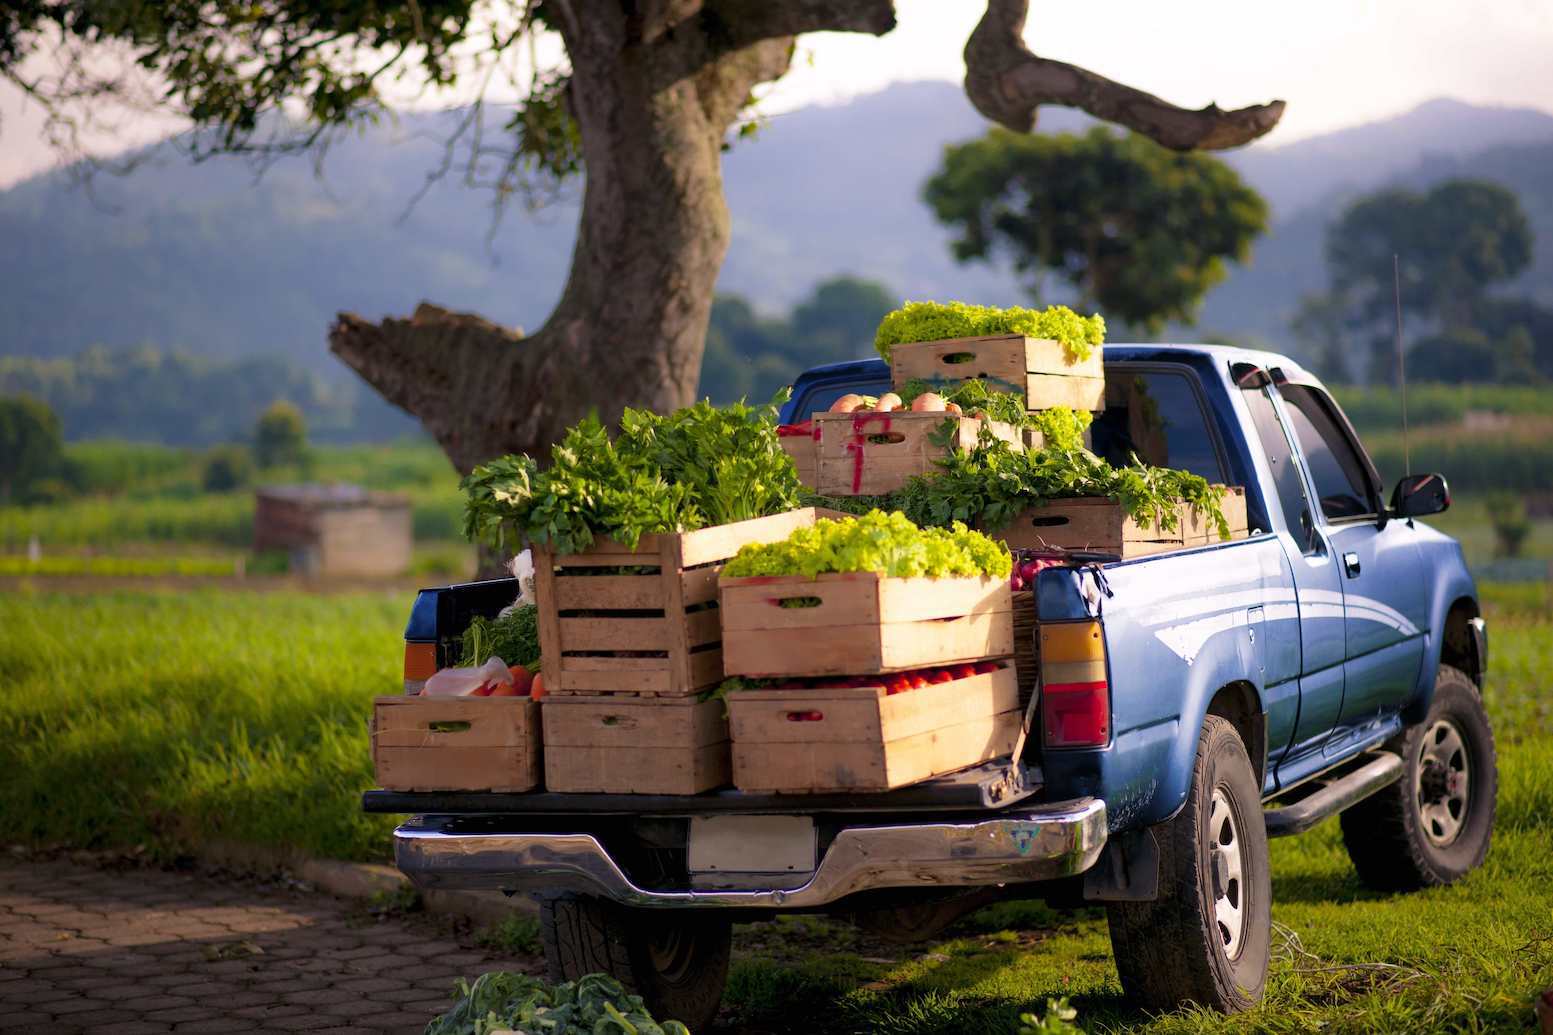 An older blue toyota tacoma with fresh produce in the truck bed